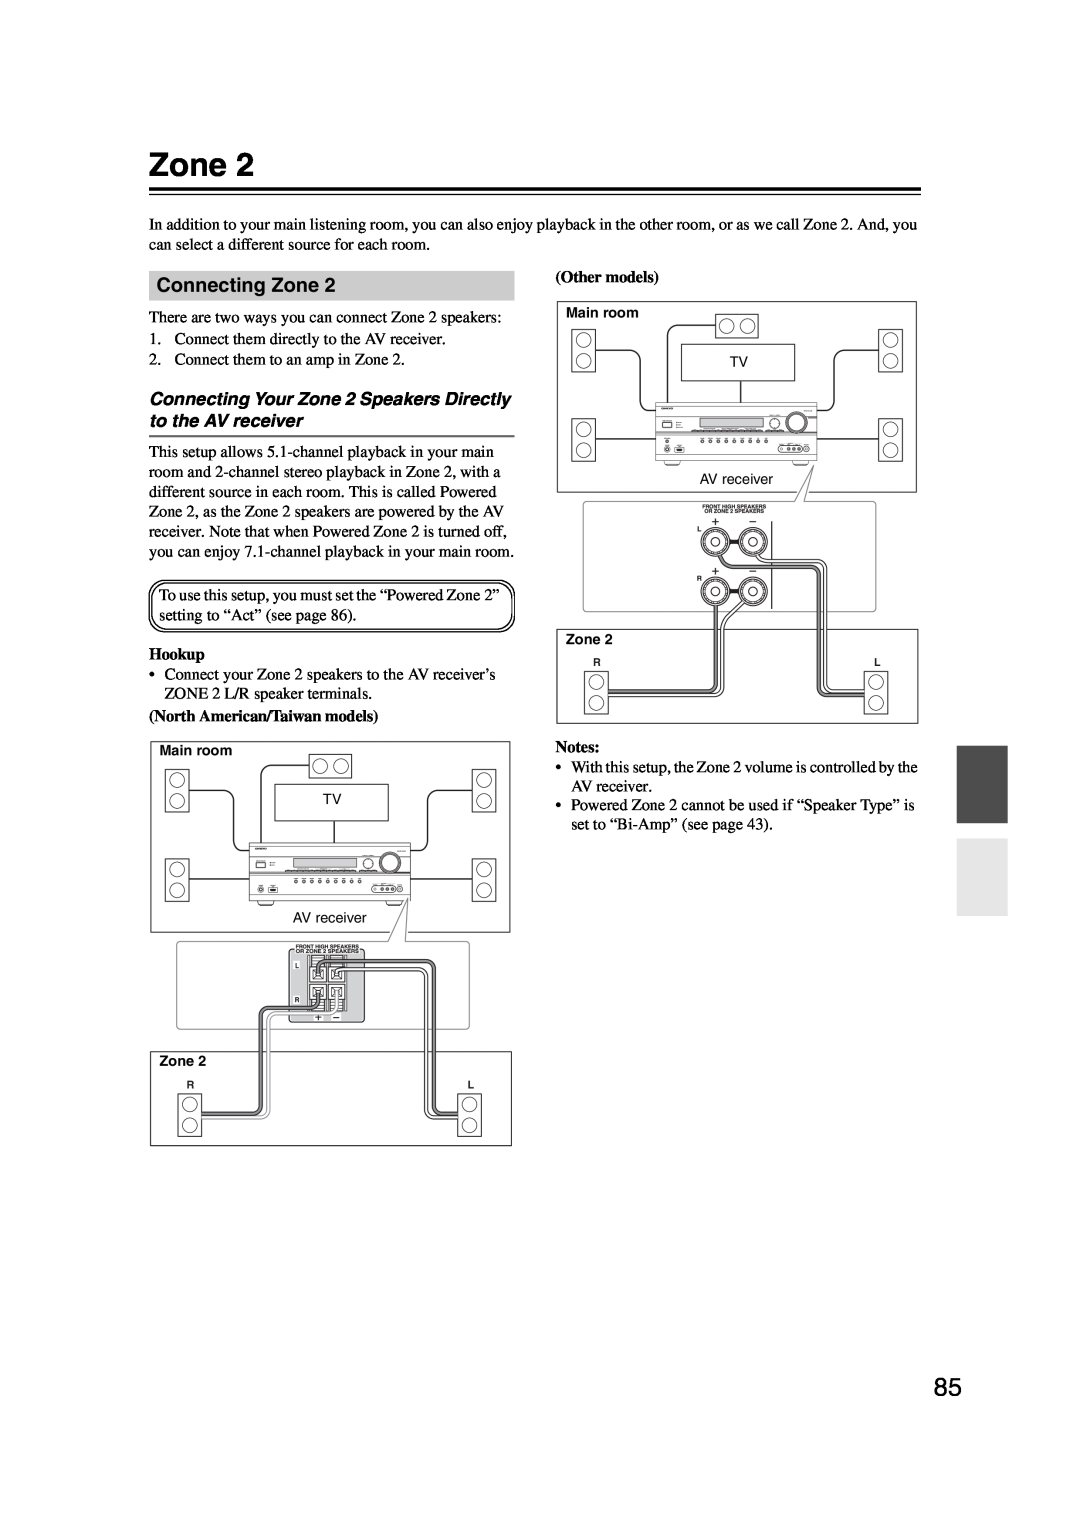 Onkyo SR607 instruction manual Connecting Zone, Hookup, North American/Taiwan models, Other models, Notes 